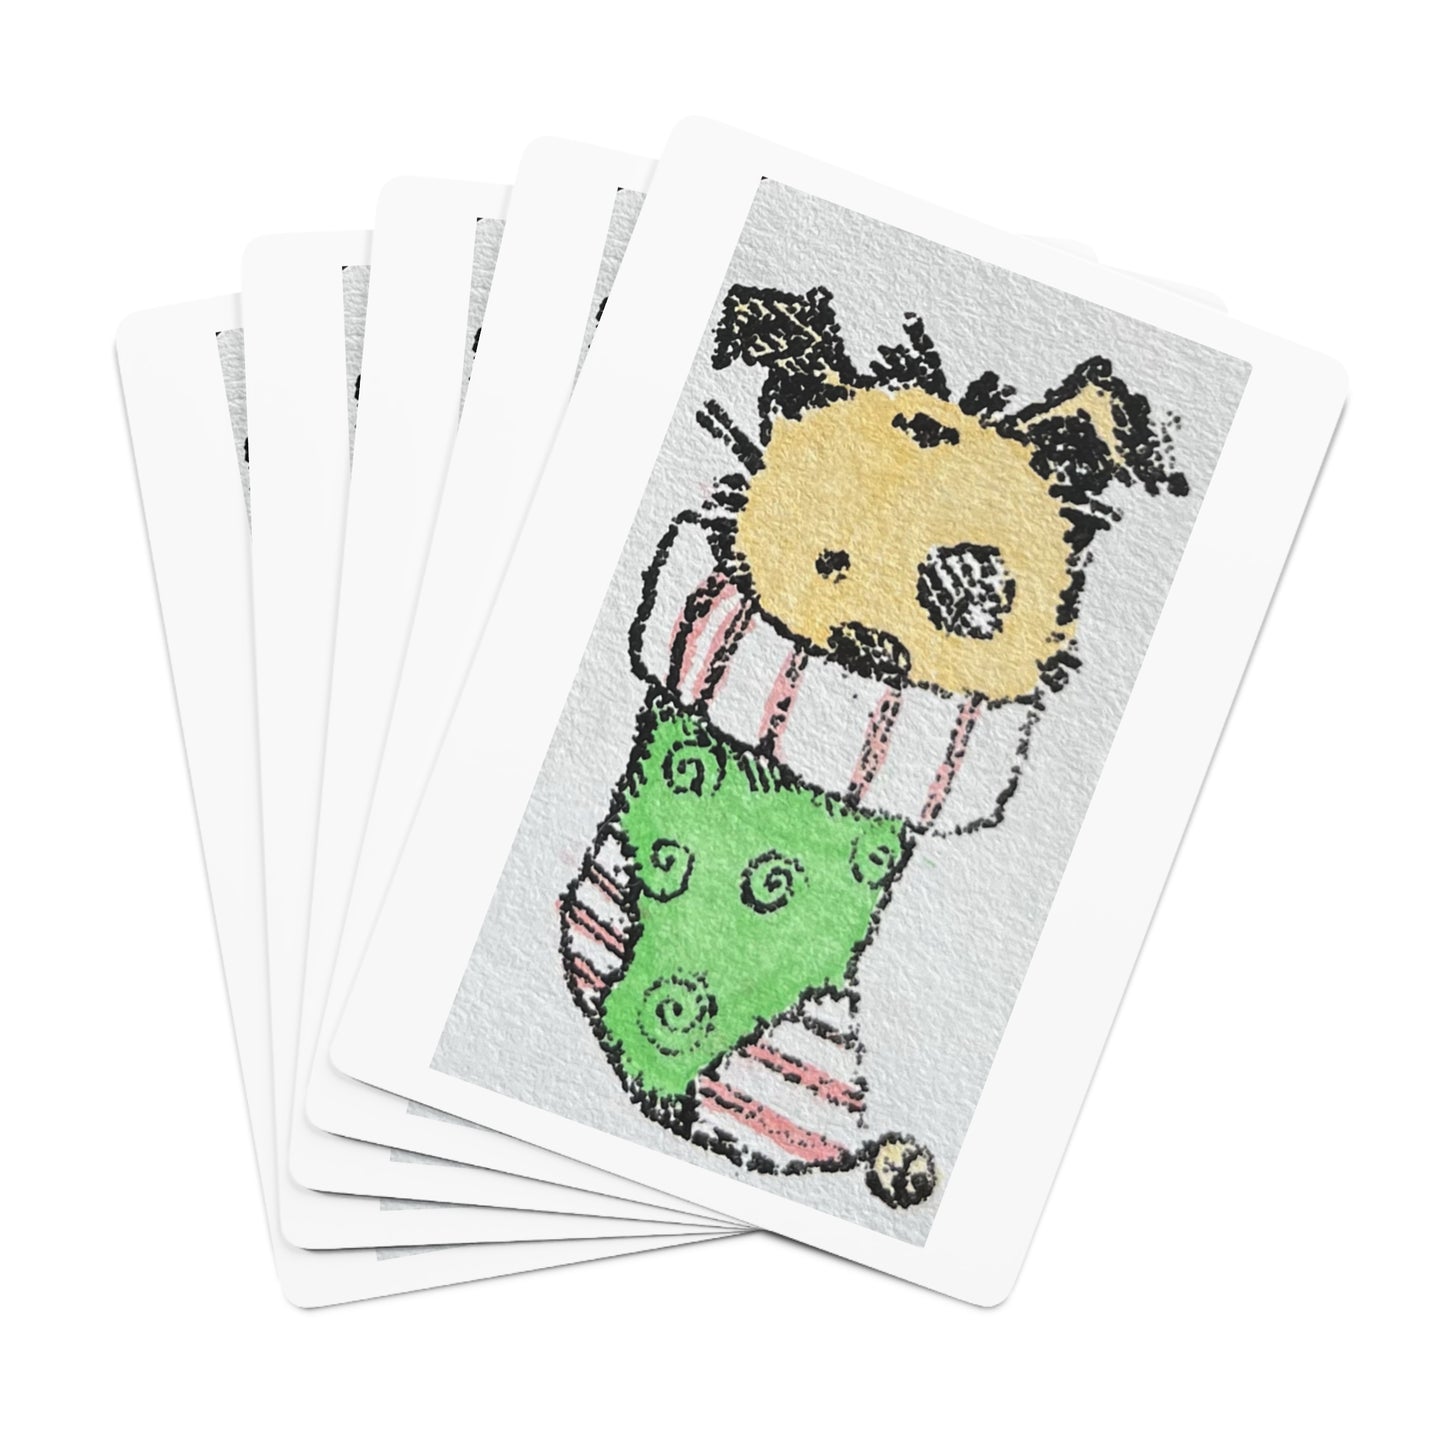 Paw-some Playtime: Canine-Inspired Playing Cards for Dog Lovers